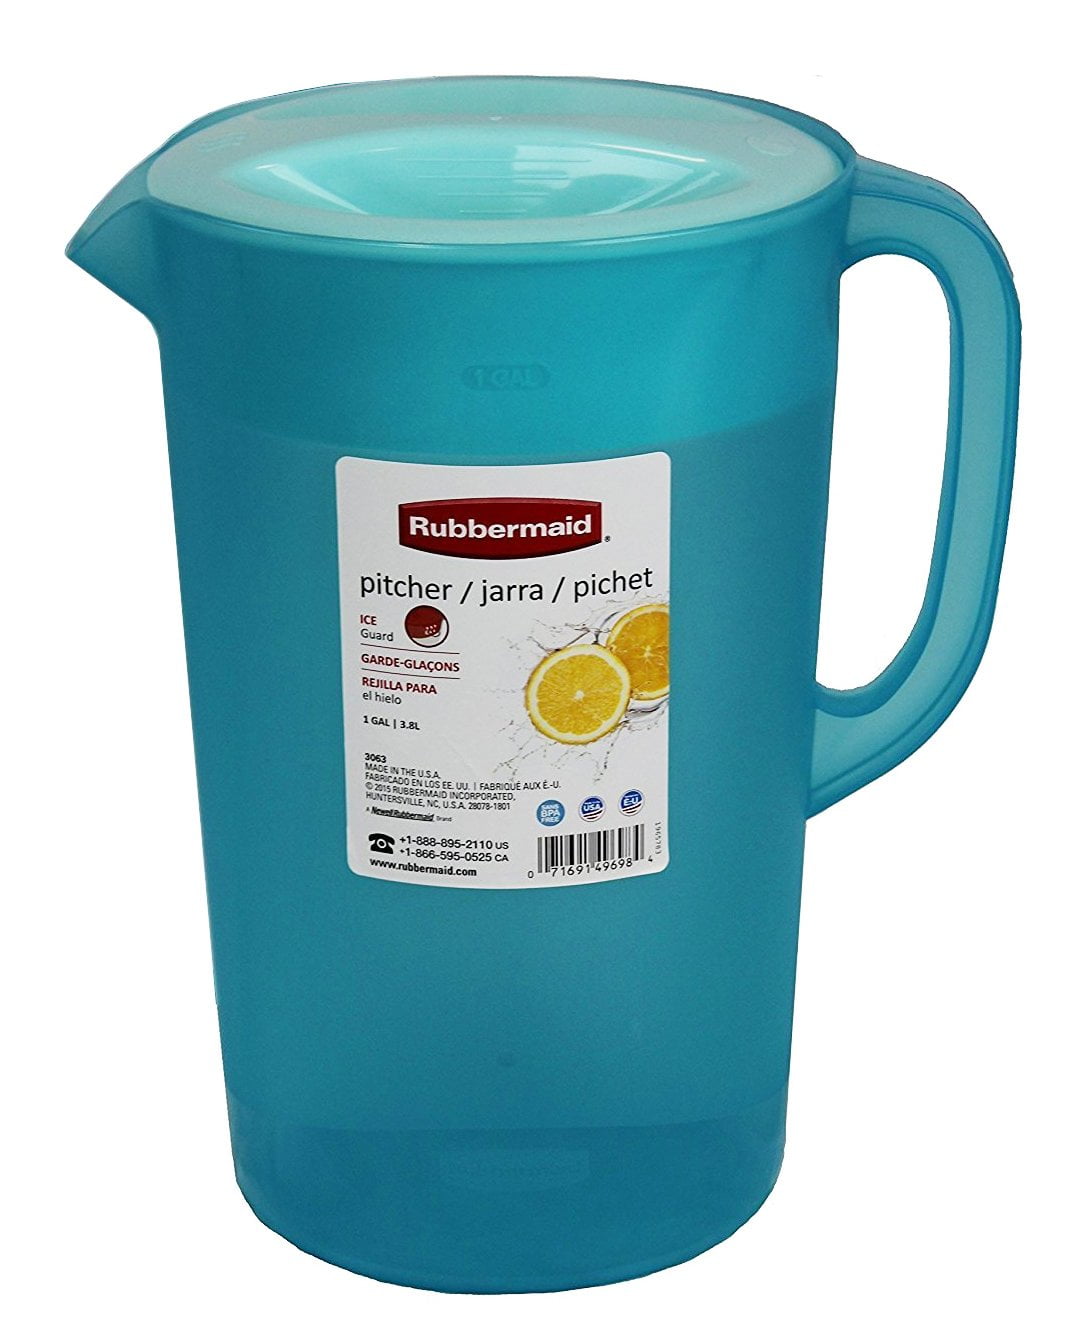 Save on Rubbermaid Compact Pitcher 2 Quart Order Online Delivery